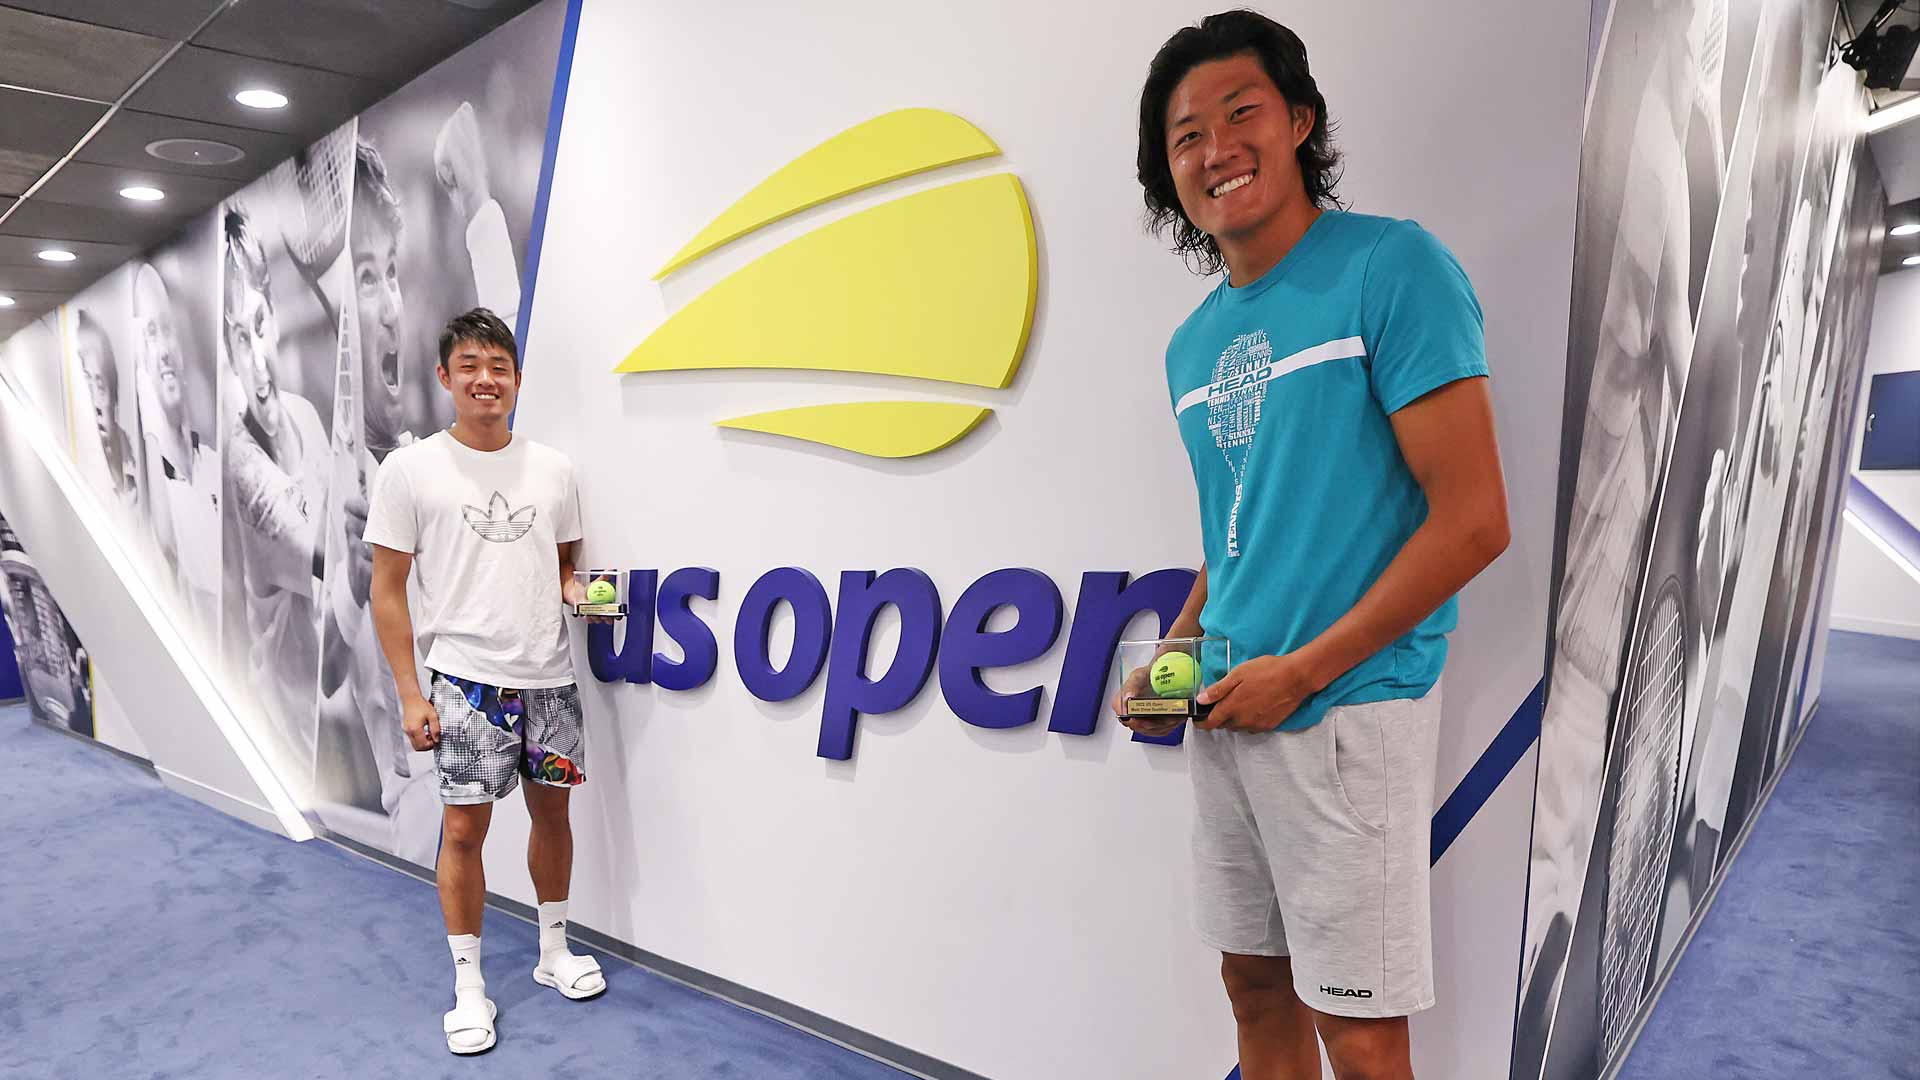 Wu Yibing and Zhang Zhizhen celebrate their qualification for the US Open.